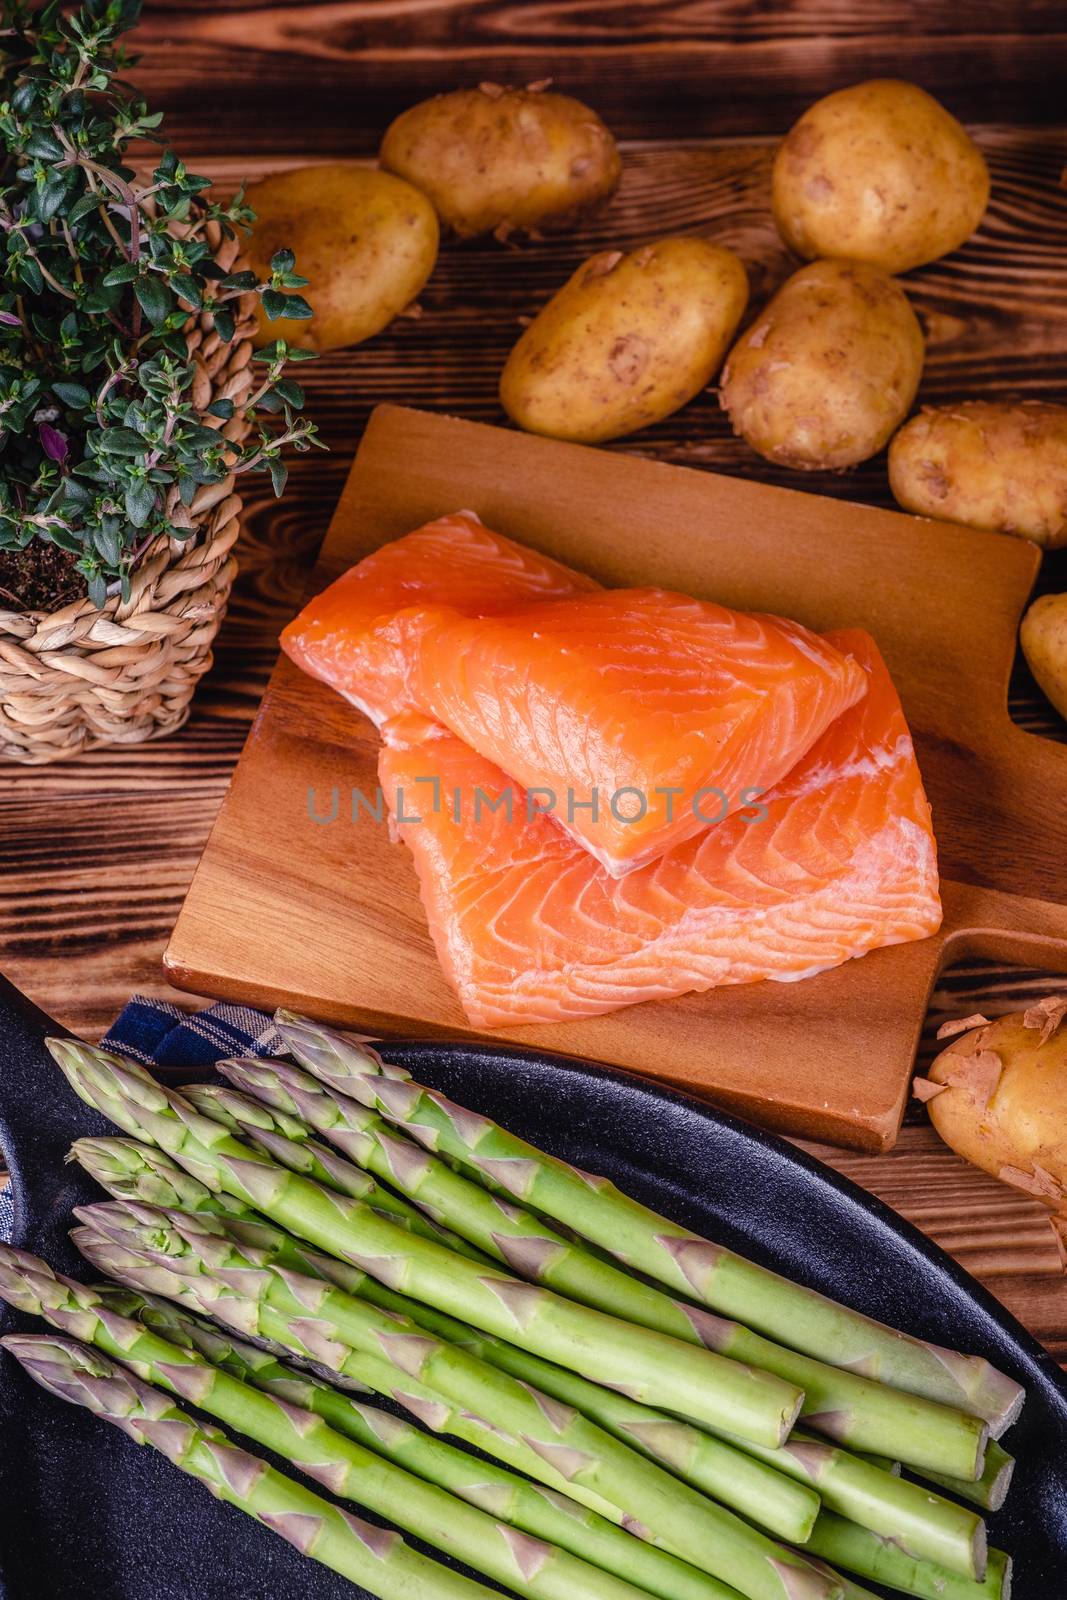 Set of fresh products for healthy food on wooden table on a rustic wooden background. selective focus